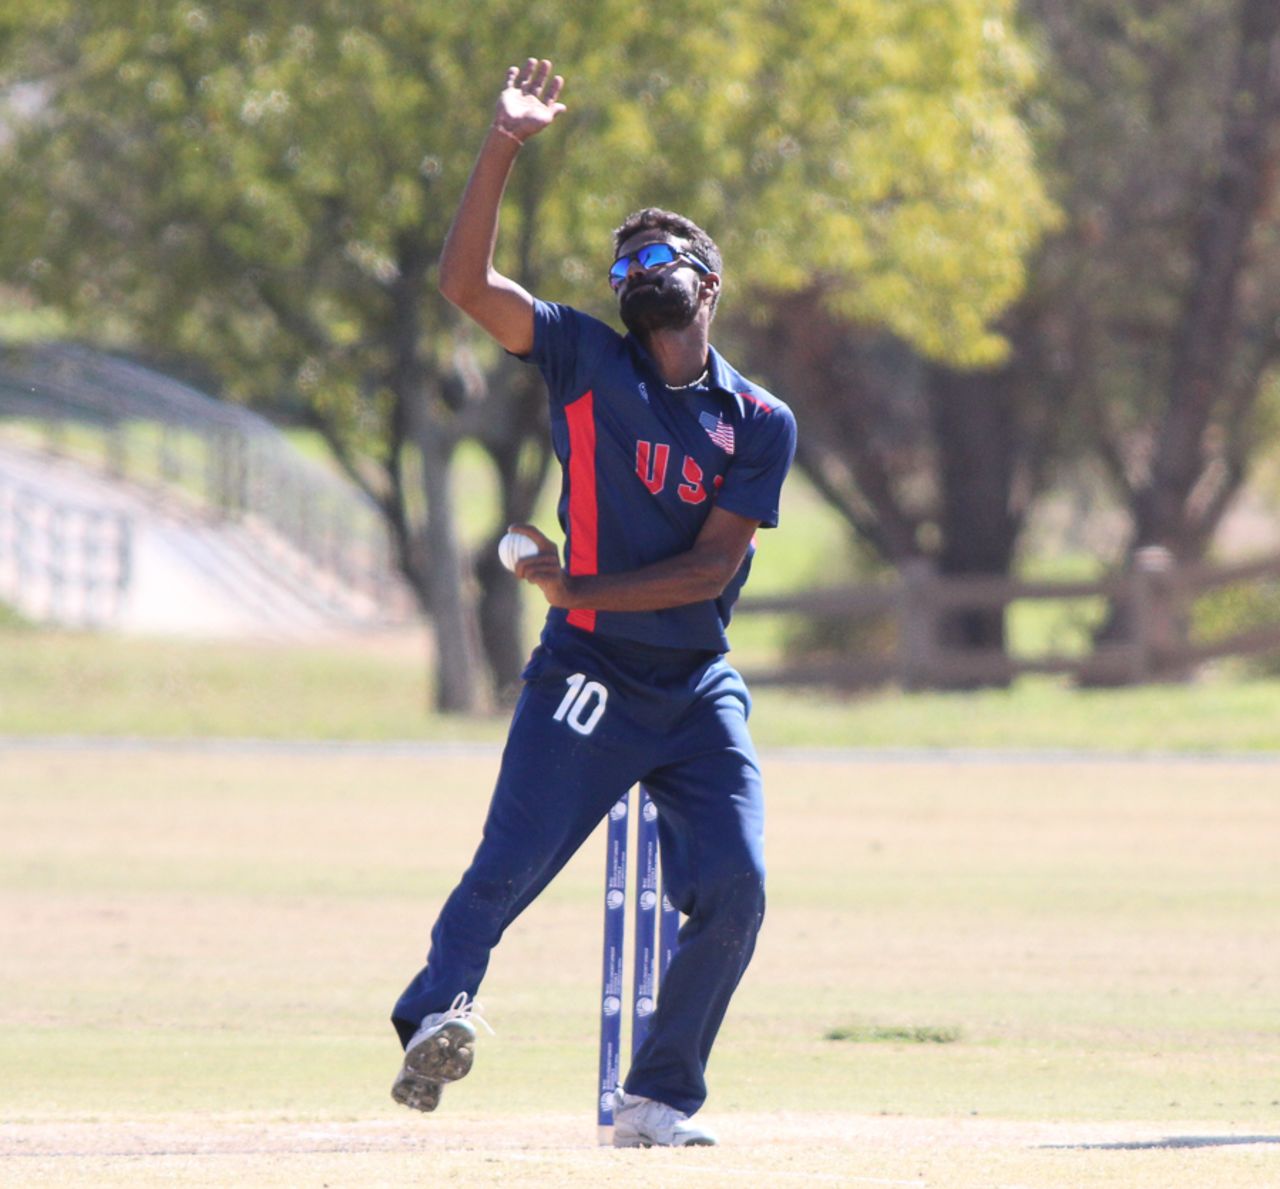 Prashanth Nair bowls during his spell of 3 for 42, USA v Jersey, ICC World Cricket League Division Four, Los Angeles, November 4, 2016